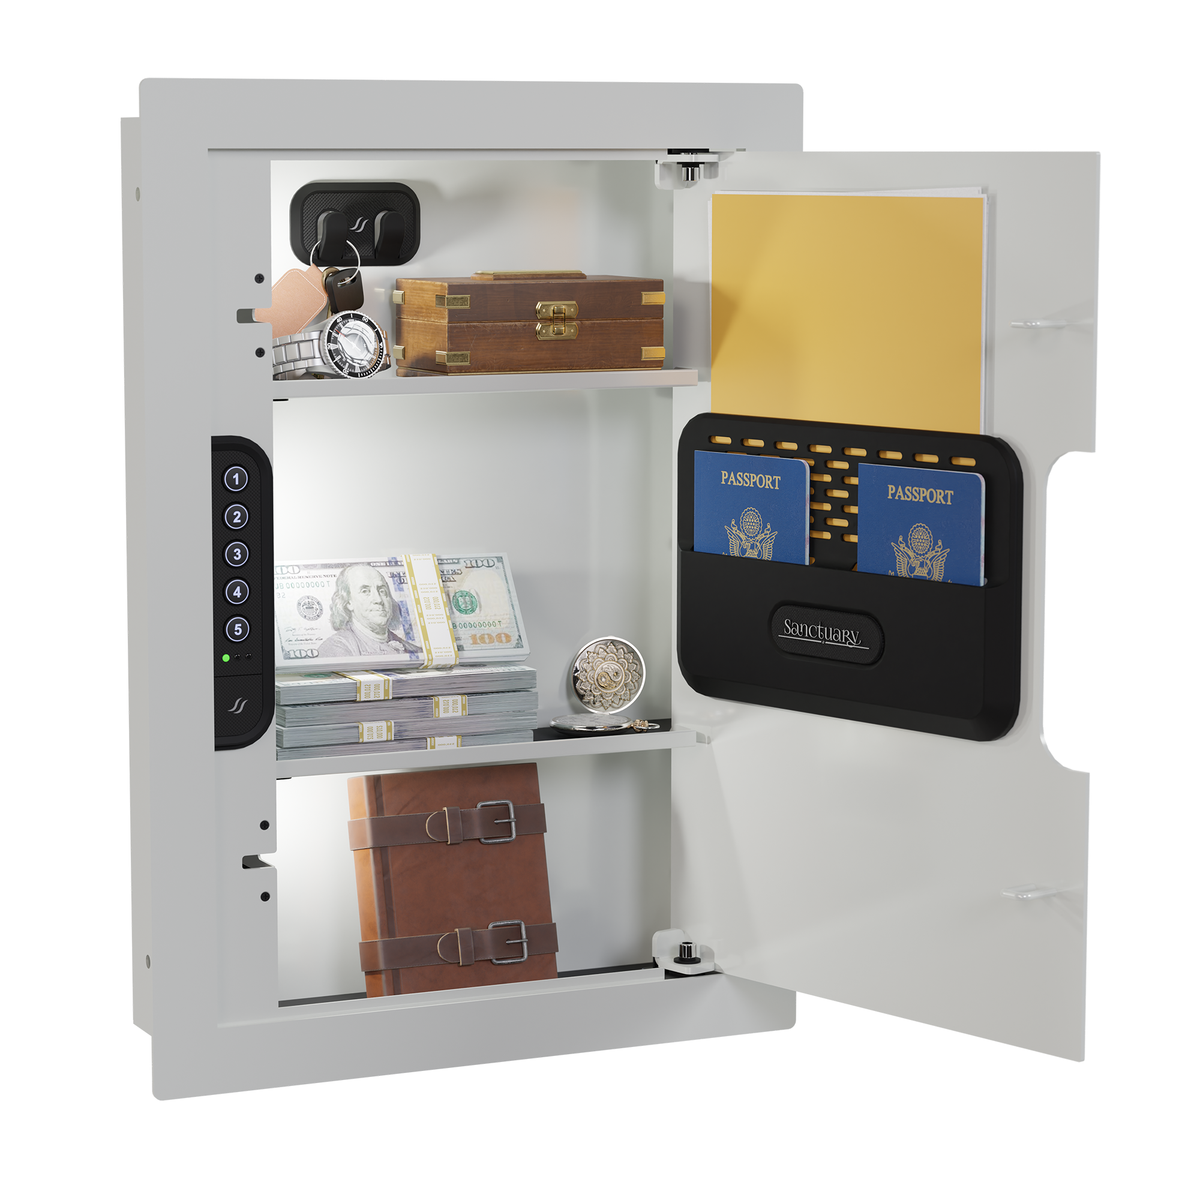 Sports Afield SA-IWV-W Sanctuary In-Wall Safe White Door Open Full